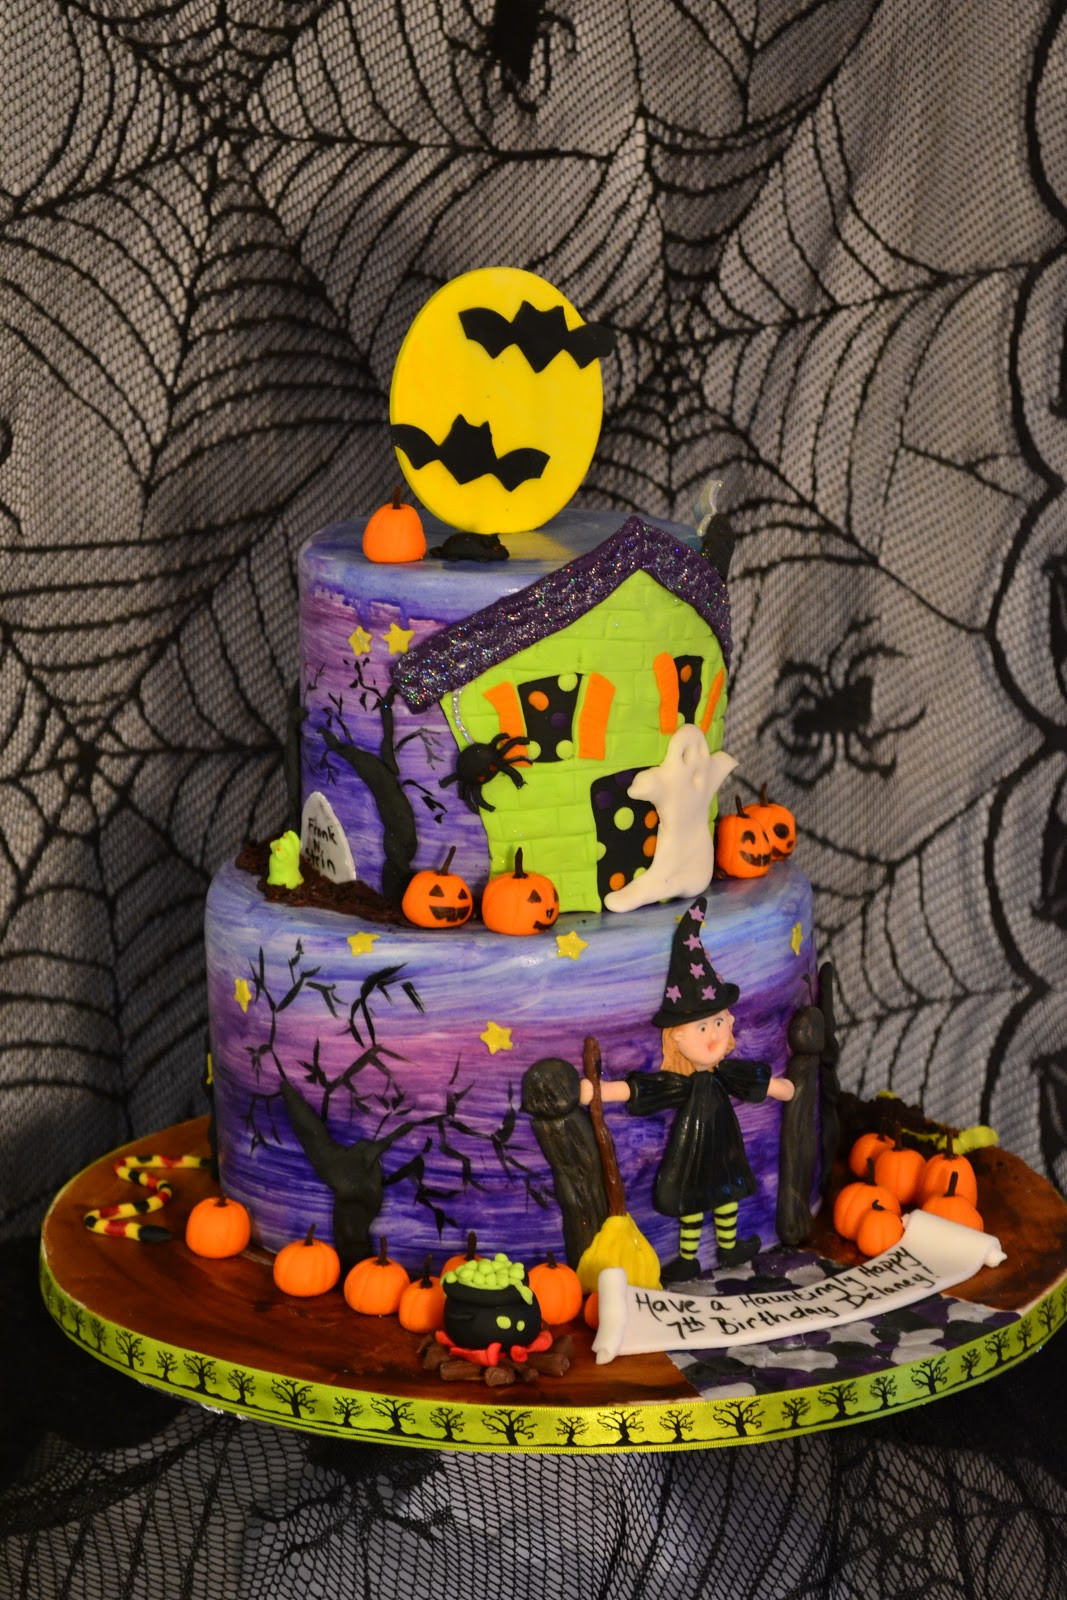 Halloween Bday Cakes
 Oh just put a cupcake in it Halloween birthday cake